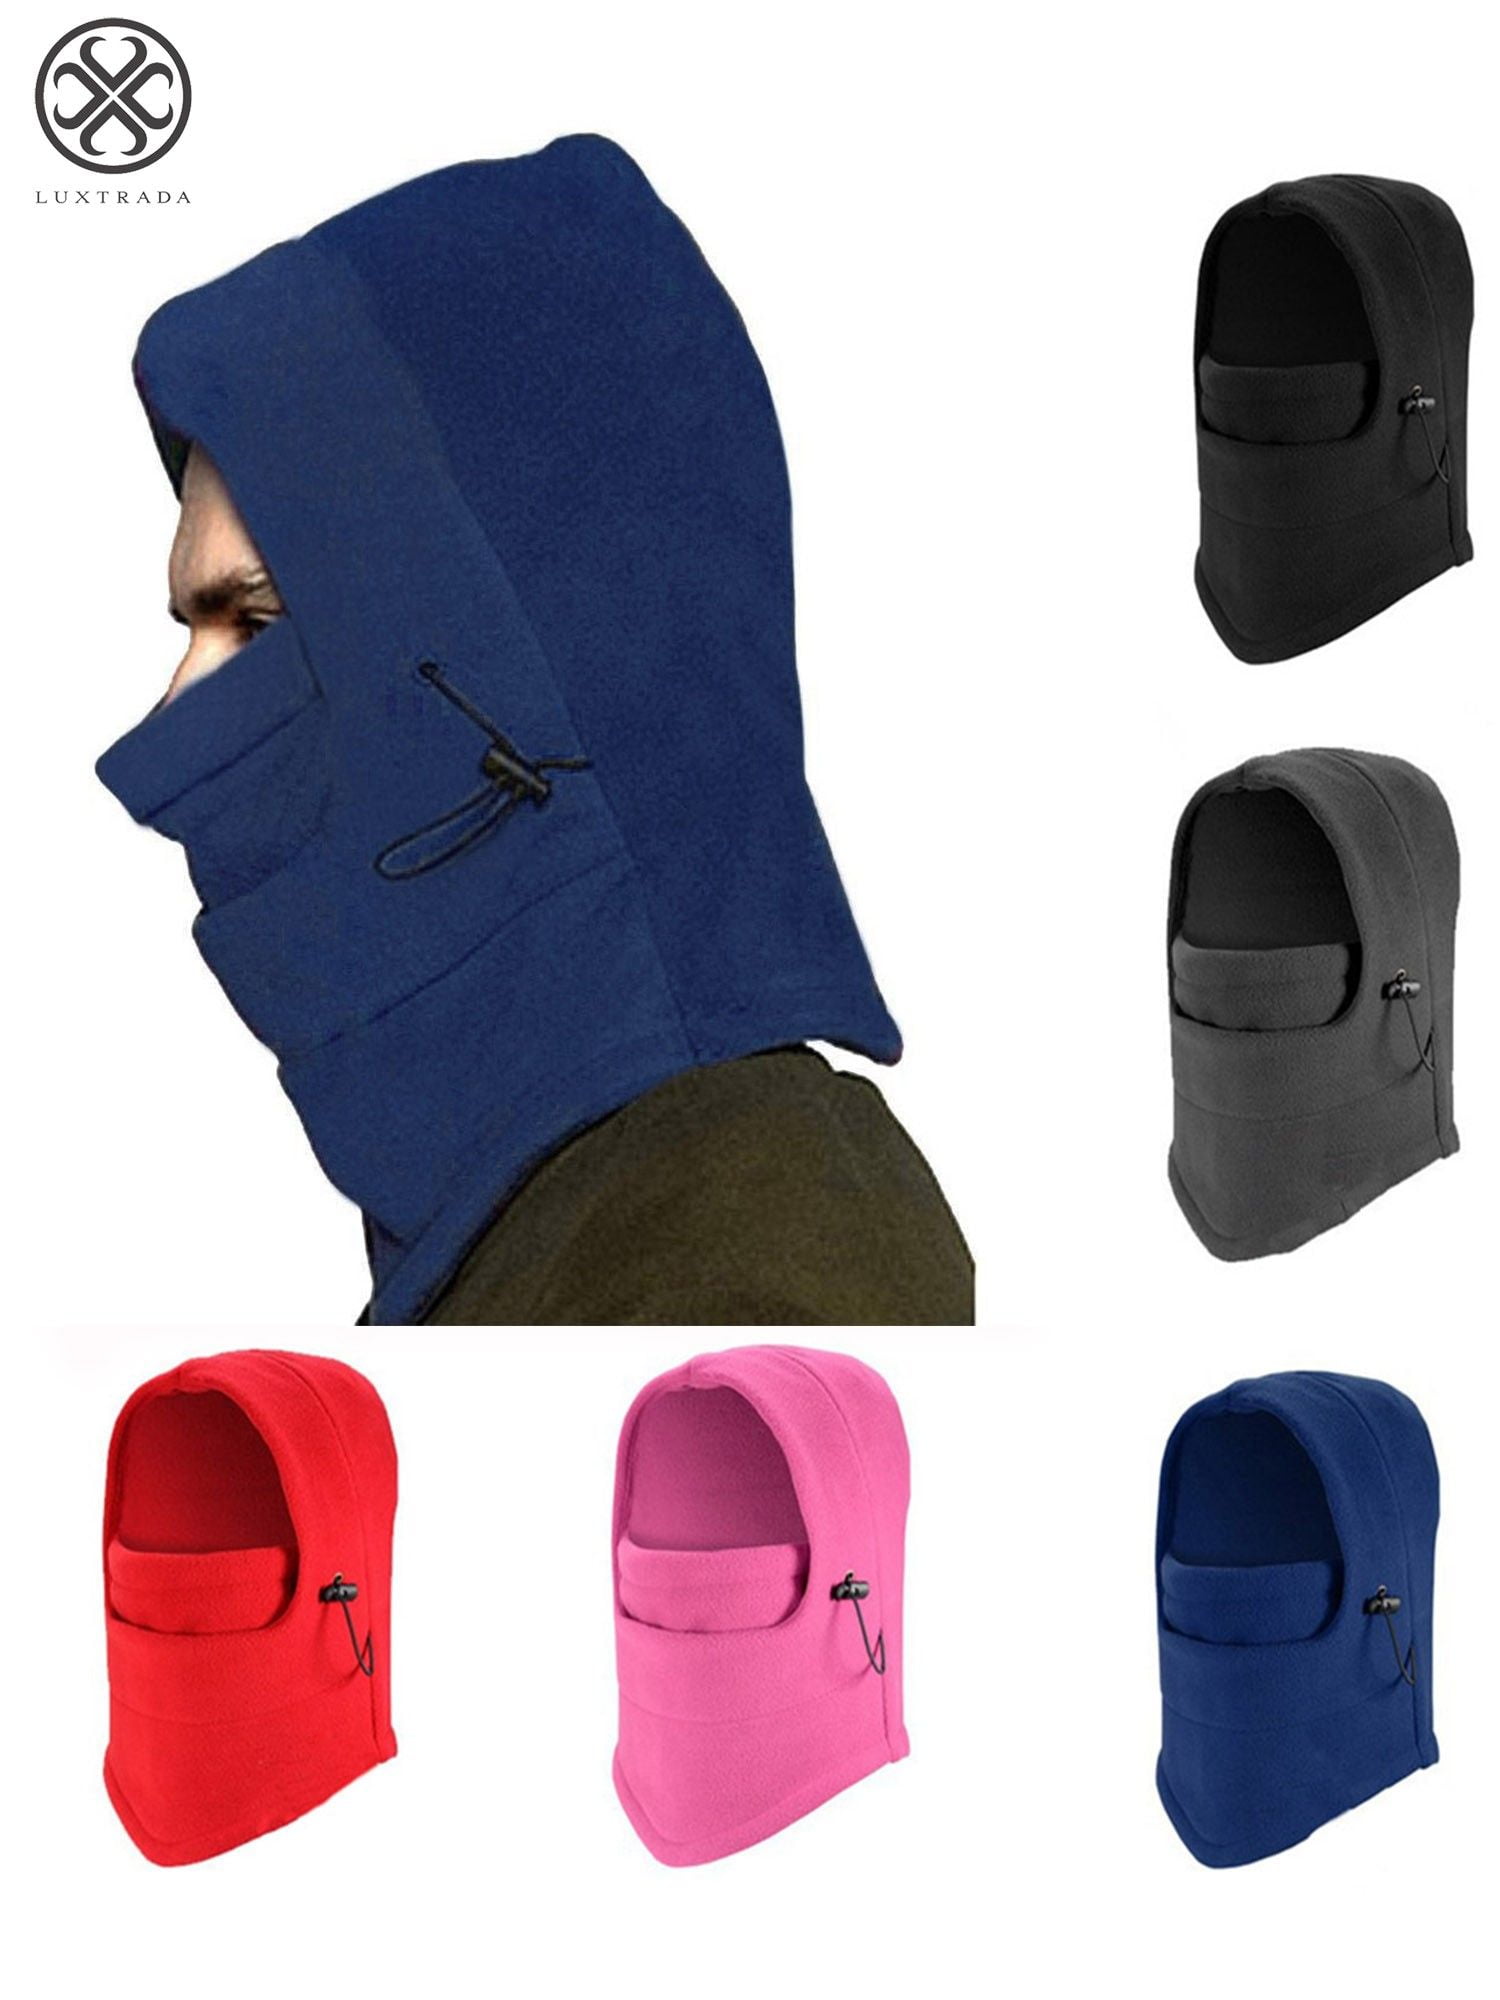 Windproof Fleece Neck Winter Warm Balaclava Ski Full Face Mask for Cold Weather 